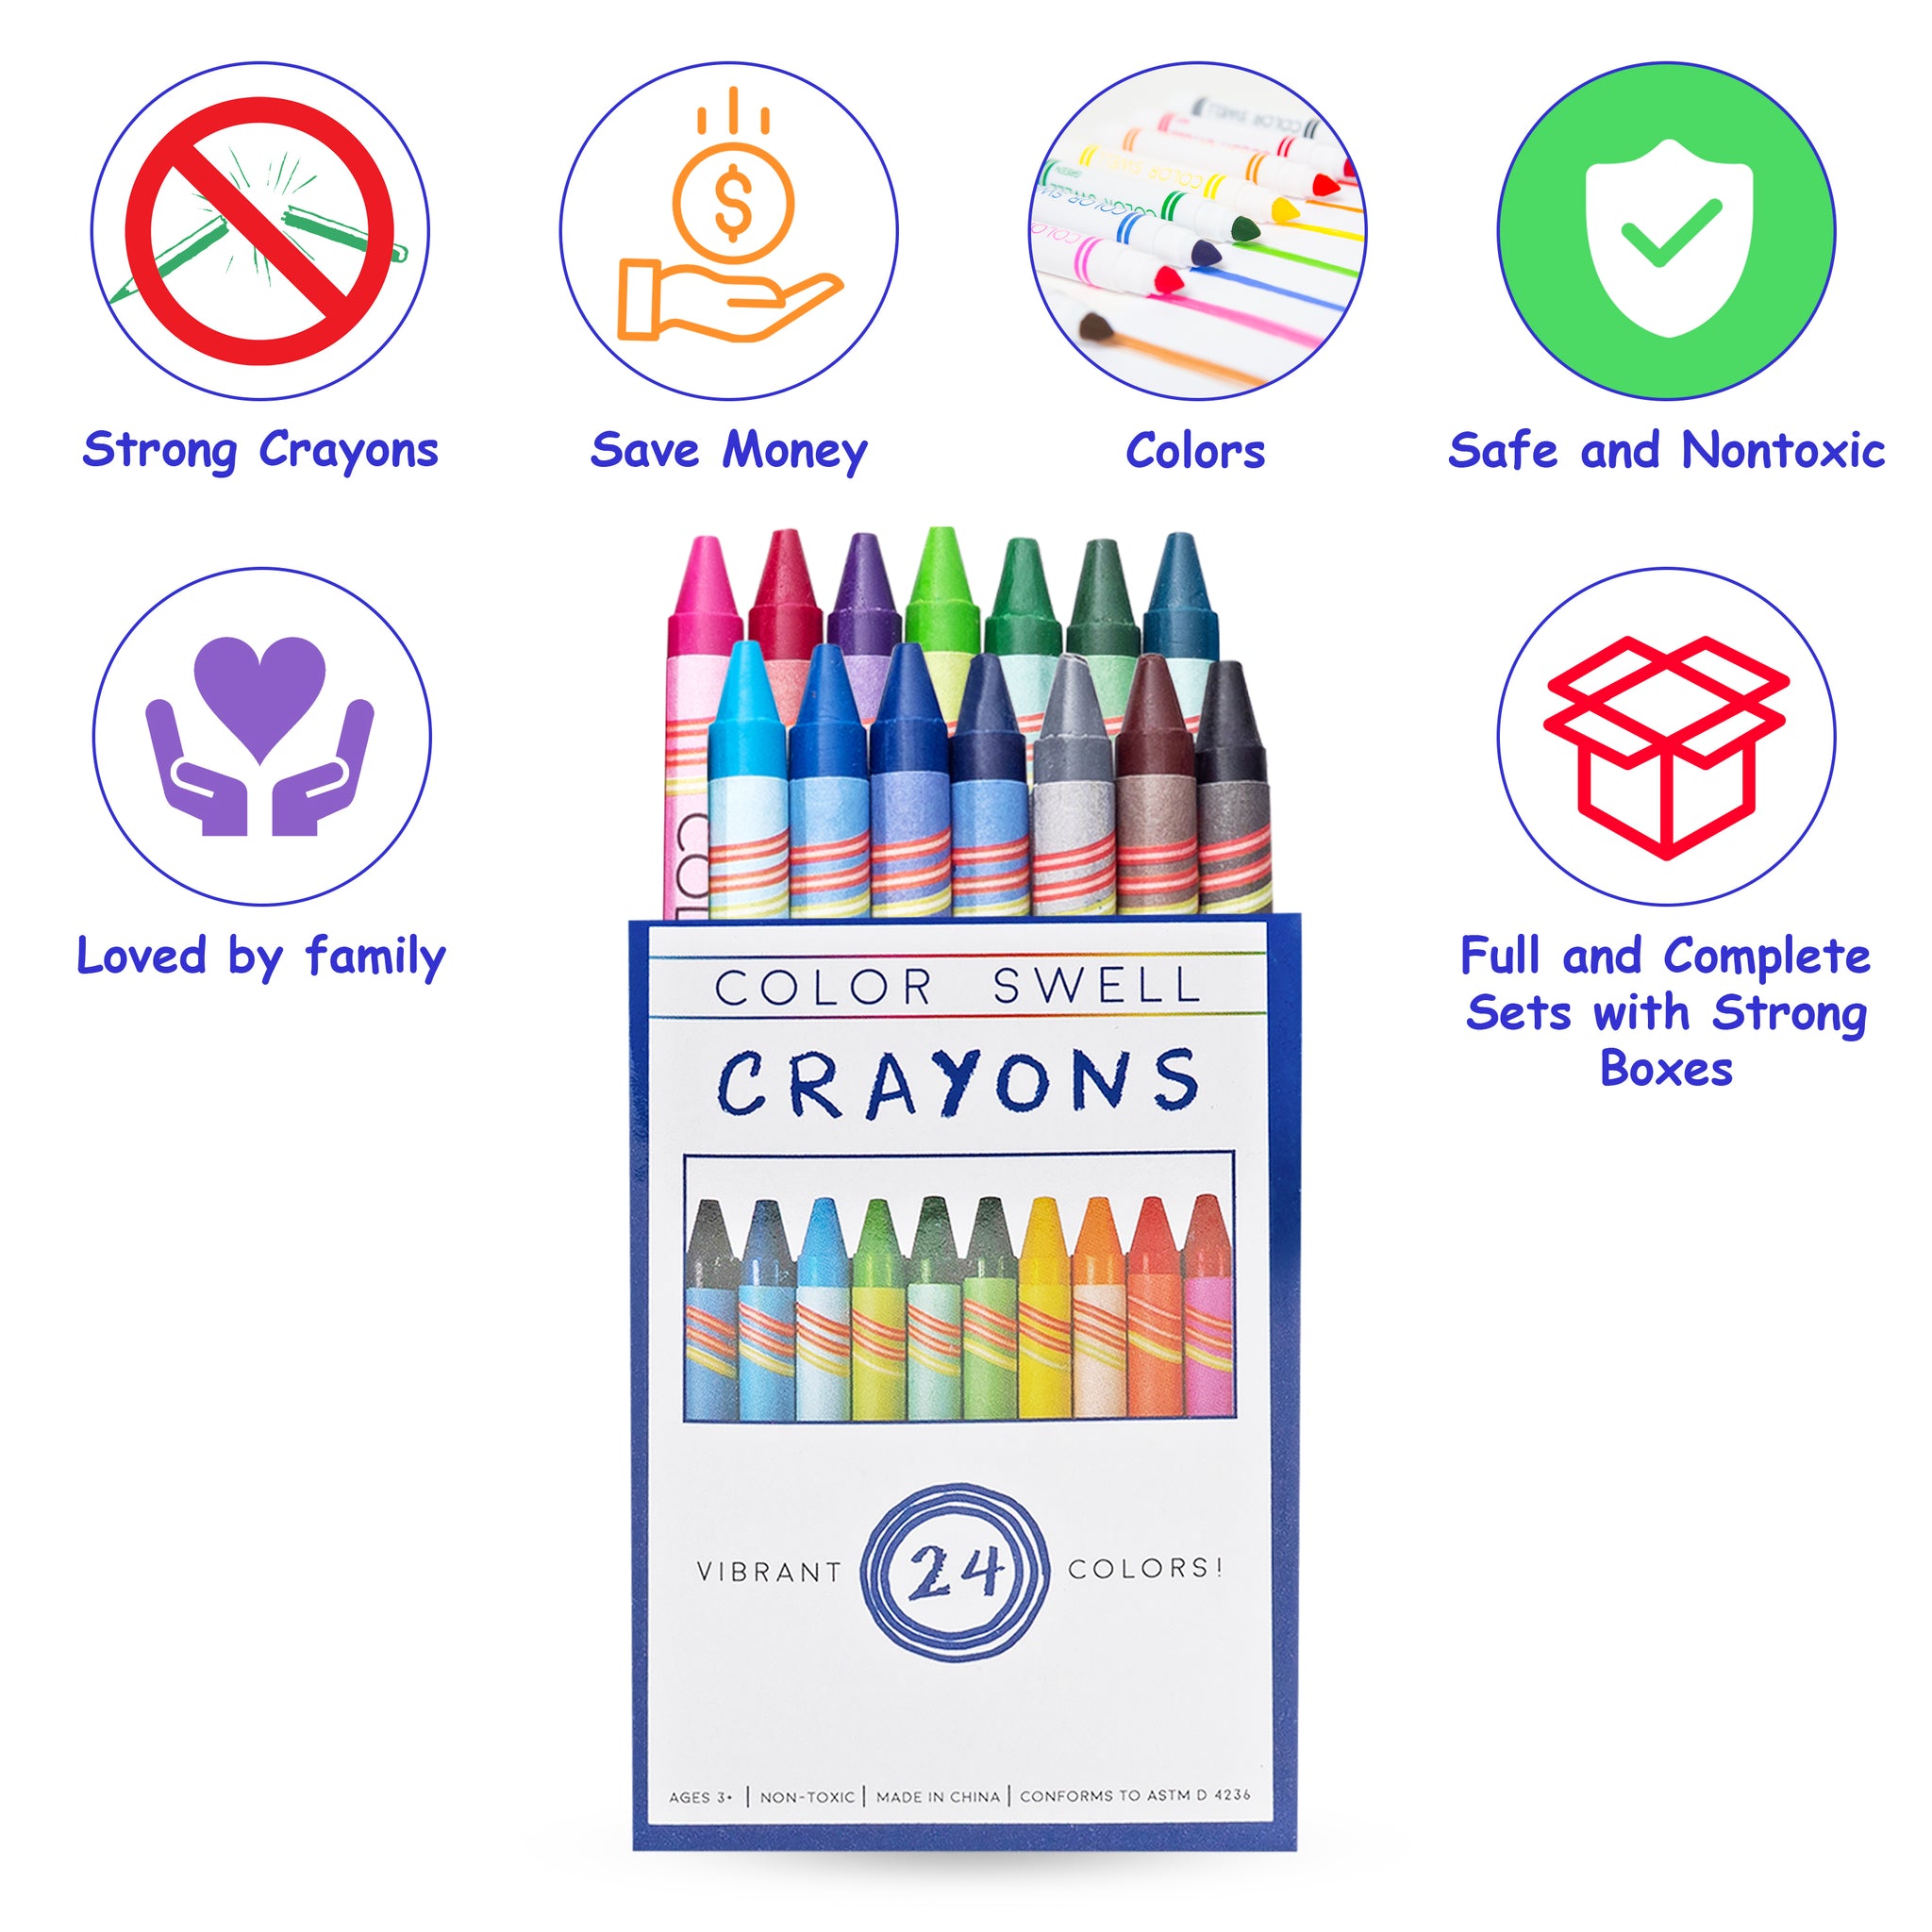 18 Packs of Crayons (24 Crayons per Pack) by Color Swell